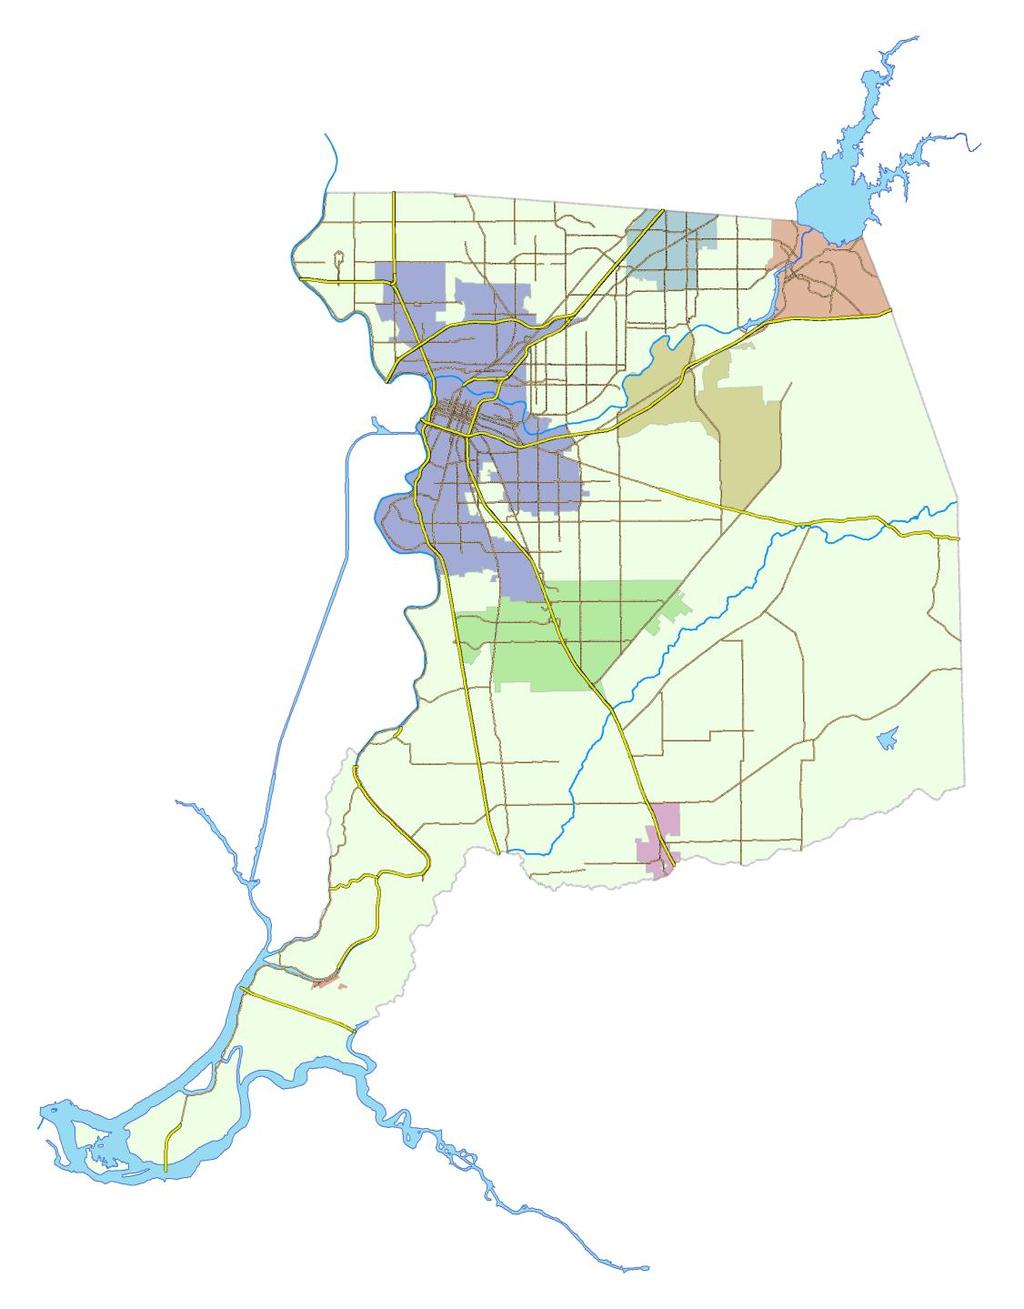 1.3 Situation Overview This chapter describes a number of potential hazards that could affect the County of Sacramento upon their occurrence, which